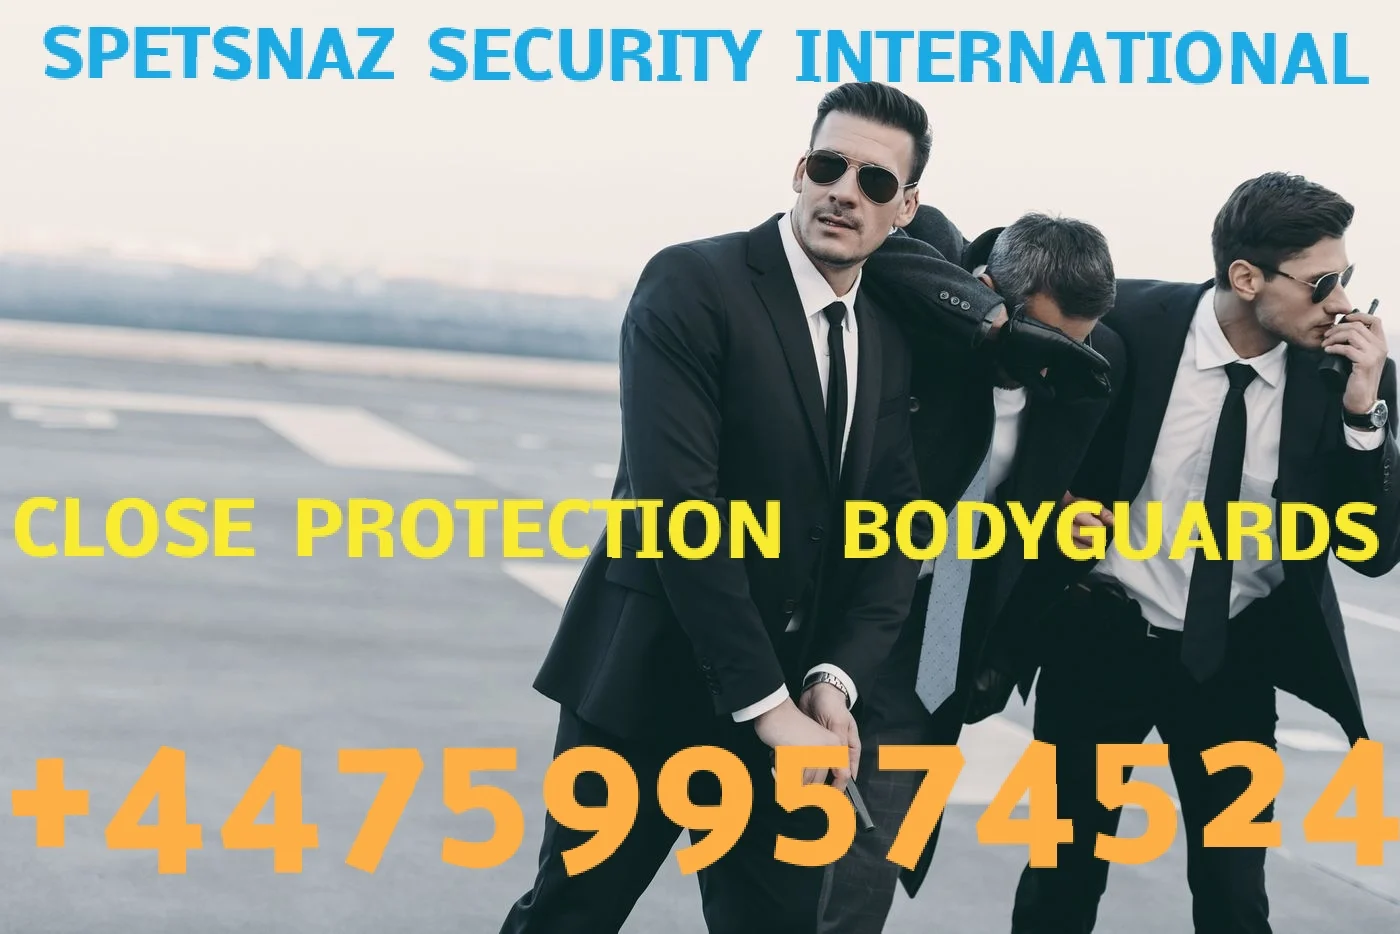 Armed Close Protection Services-Executive bodyguard-Executive Close Protection. With its close protection teams, Spetsnaz Security International Fidel Matola can work with its clients to protect their business's most valuable assets – their personnel, families, and properties at all points in potential risk situations.-